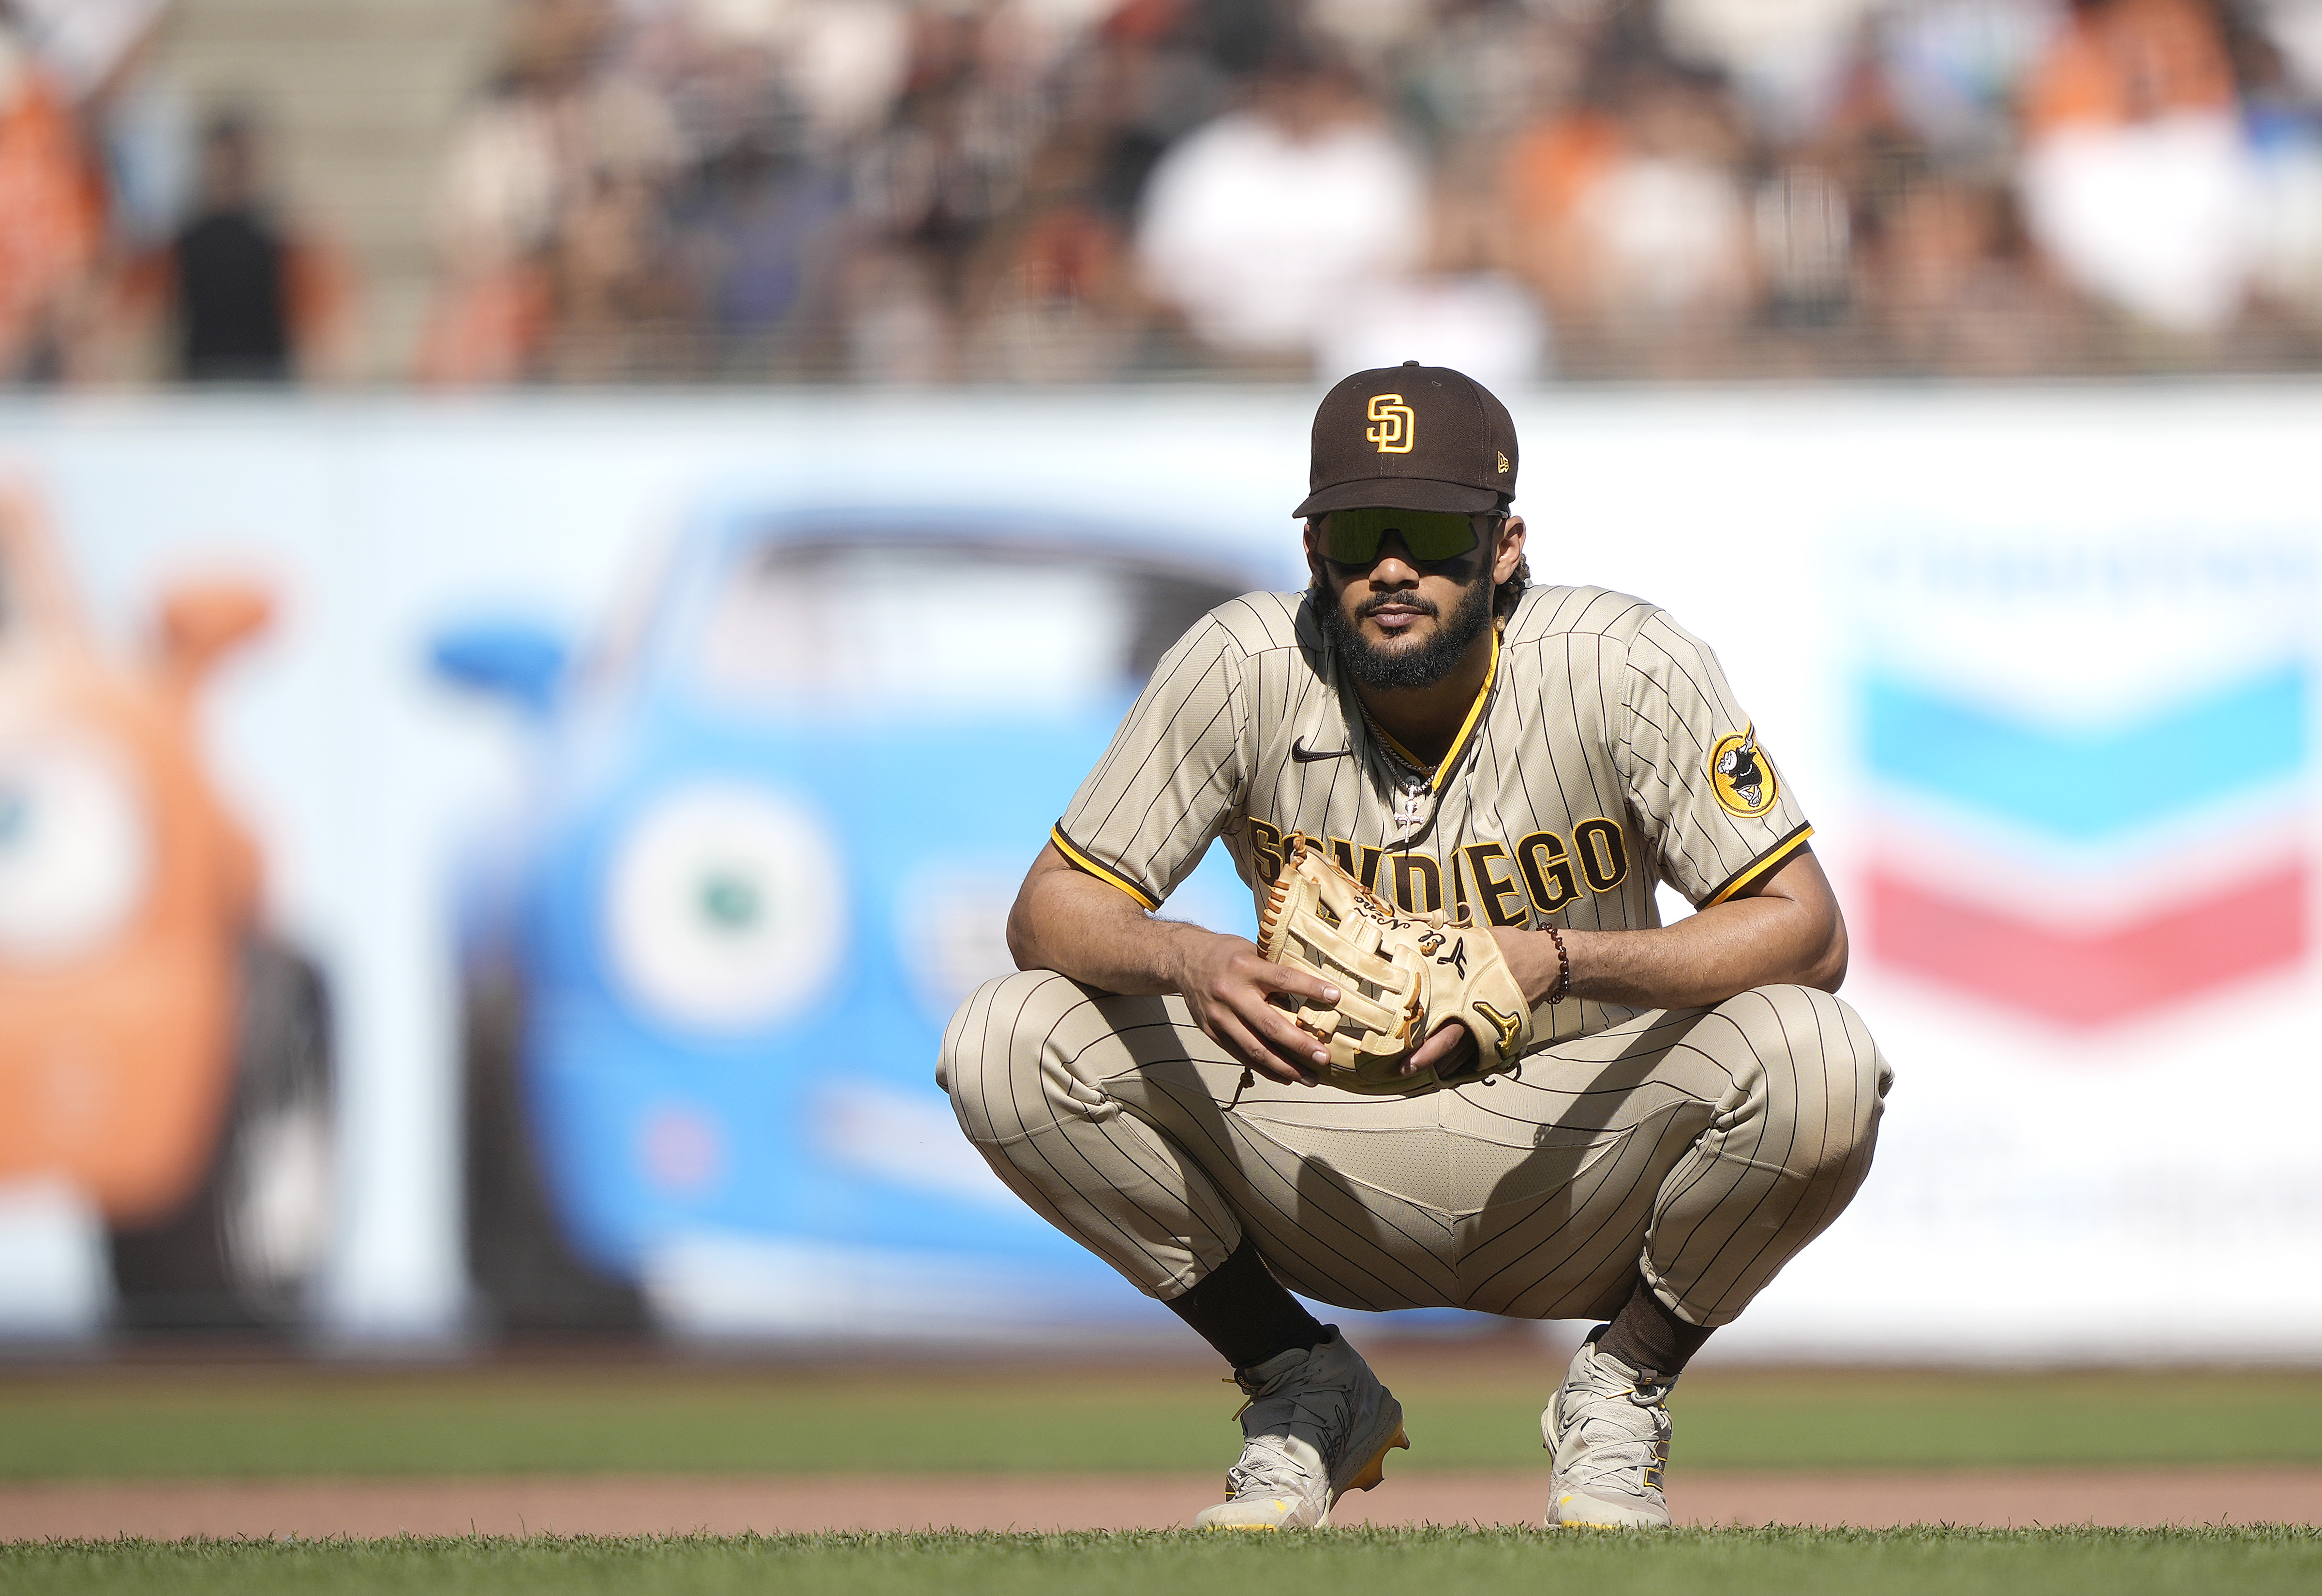 Fernando Tatis Jr. of the San Diego Padres looks on from his position against the San Francisco Giants in the bottom of the six inning at Oracle Park on October 02, 2021 in San Francisco, California.